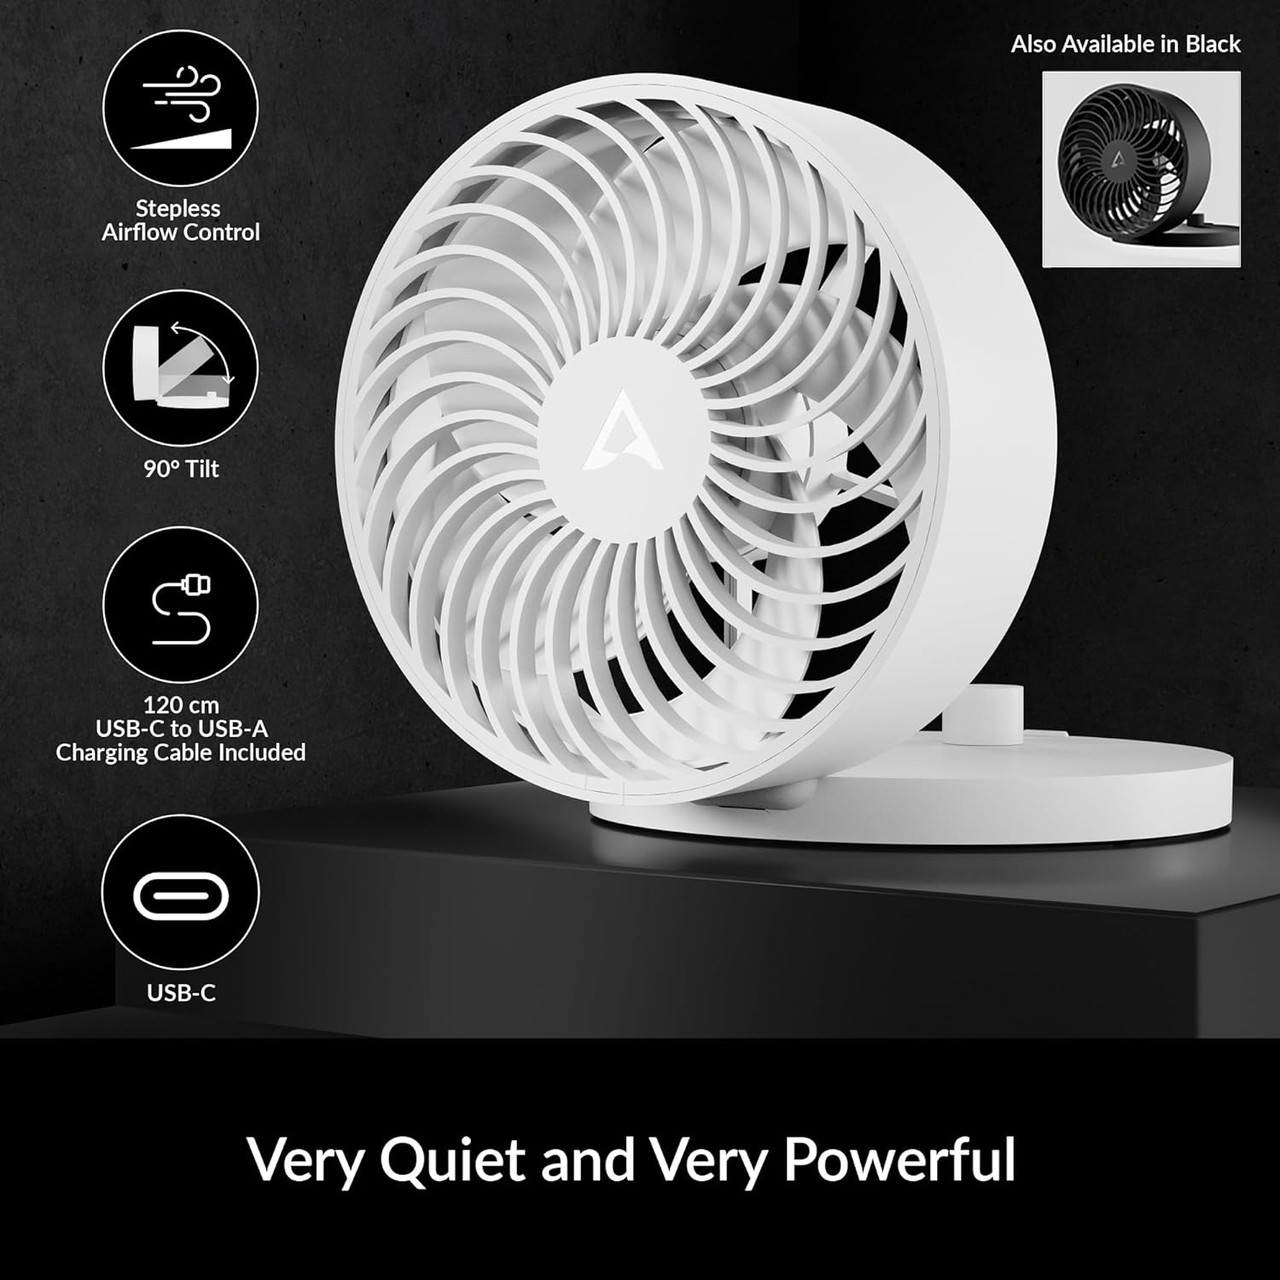 ARCTIC Summair Plus Foldable table fan with integrated rechargeable battery USB-C connection 600-3300 rpm - White (AEBRZ00026A)